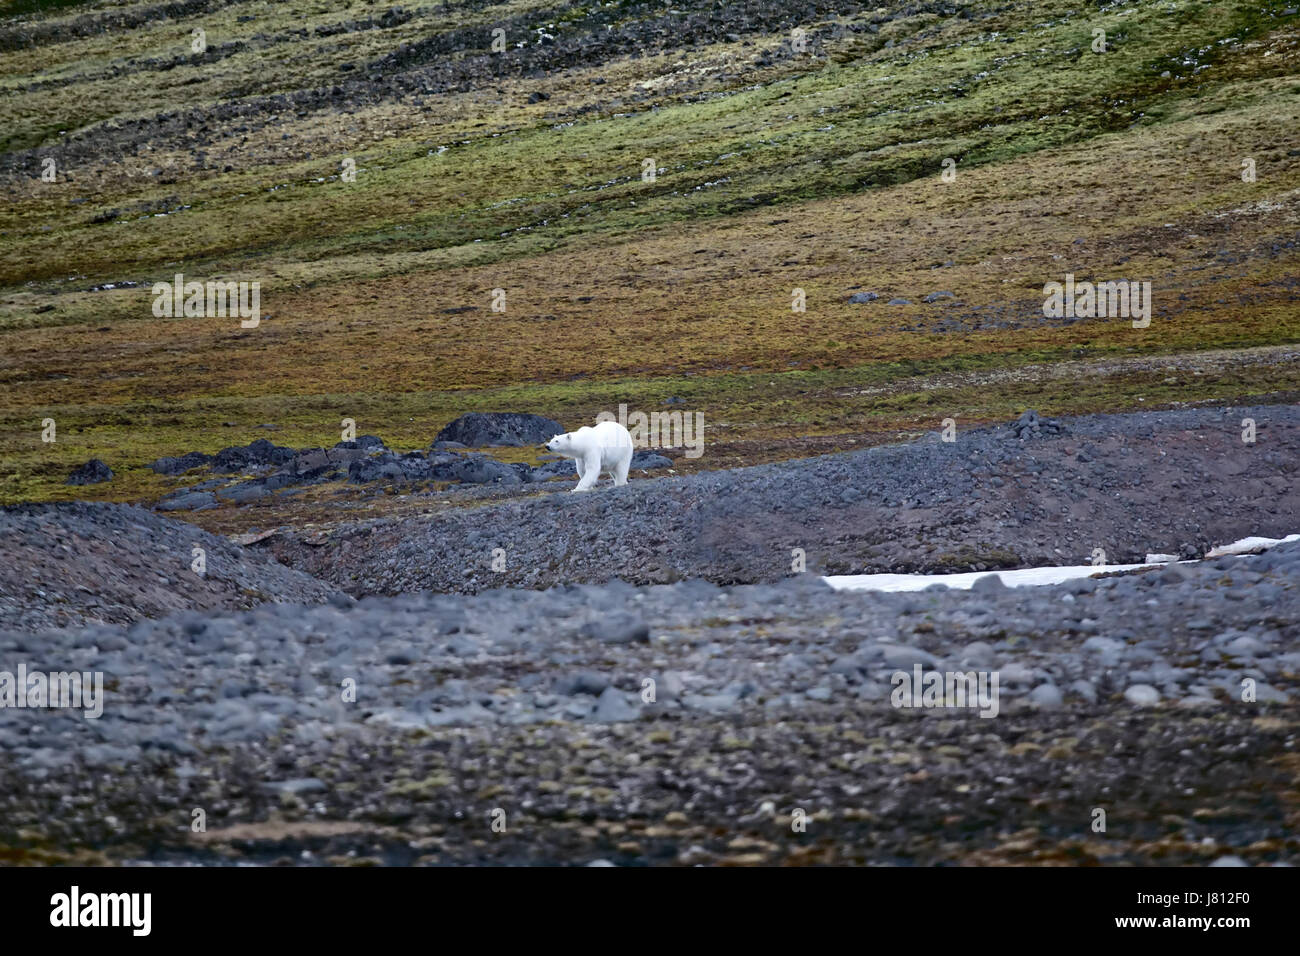 Polar bear on the Franz Josef Land. Arctic cold desert and areas of tundra on South side of mountains Stock Photo